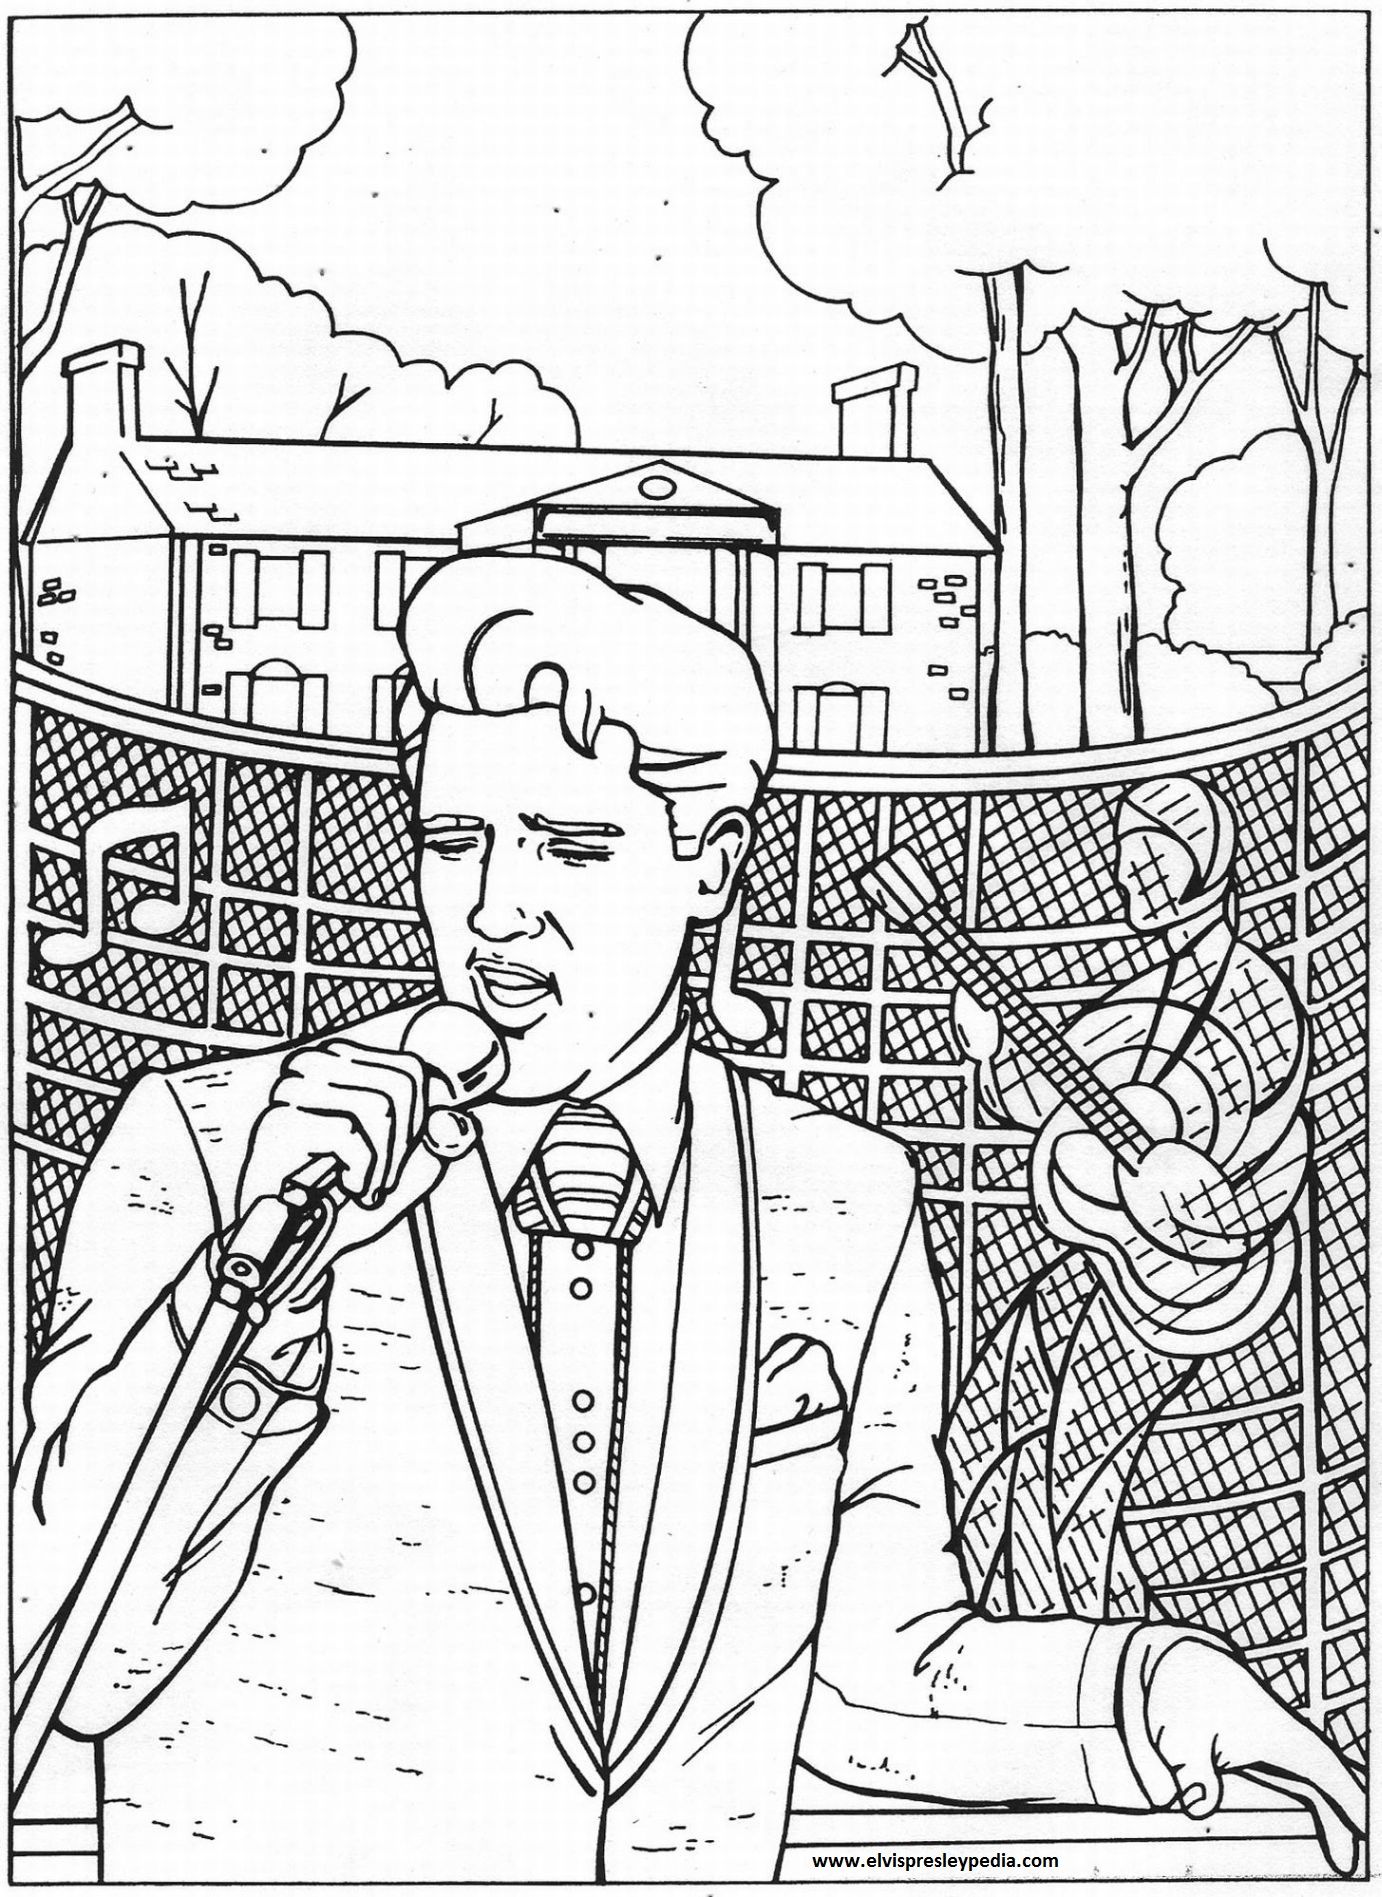 Elvis | Free Coloring Pages on Masivy World